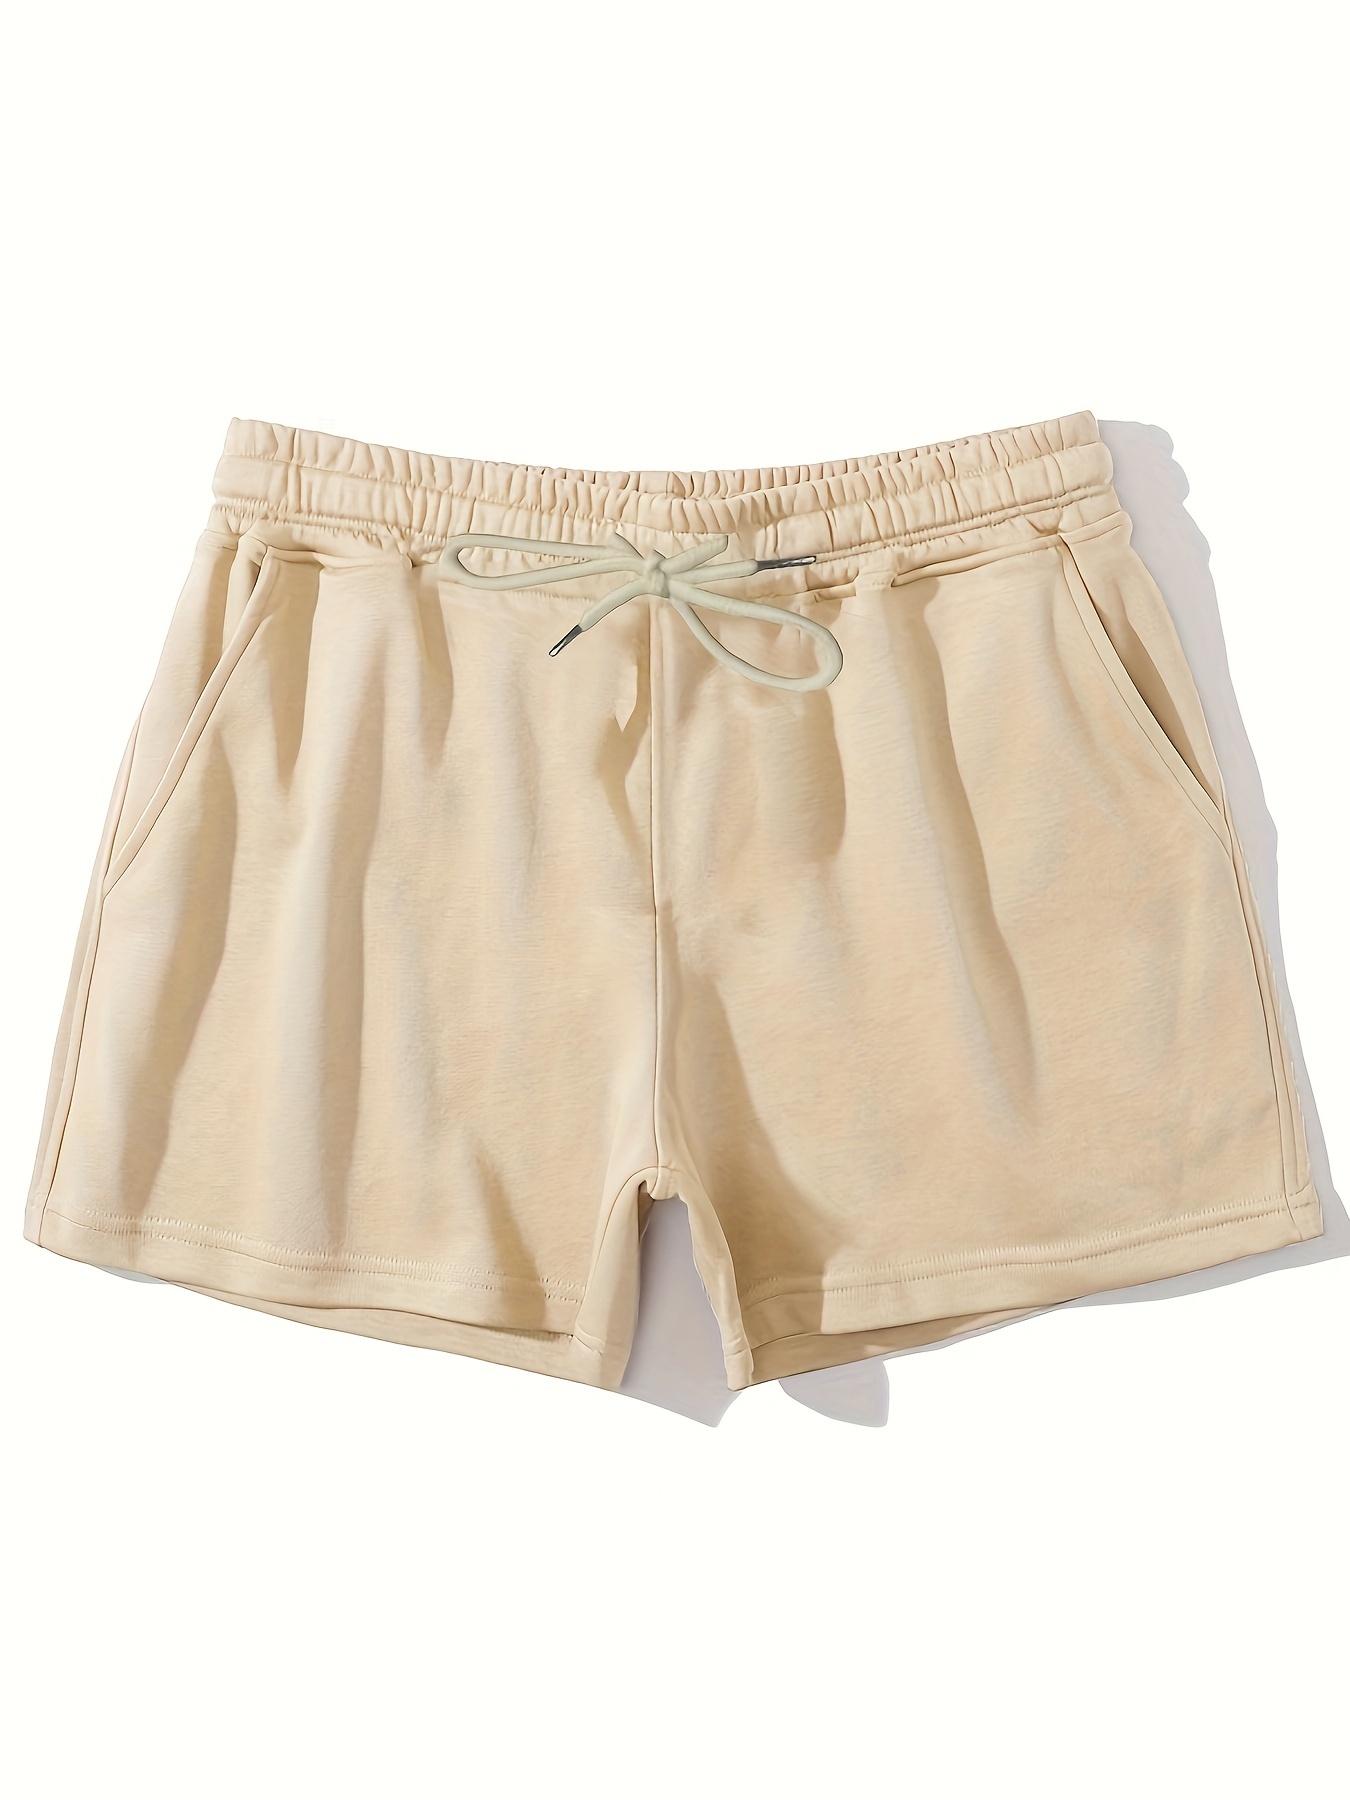 COS - The beige linen shorts: a warm-weather classic.